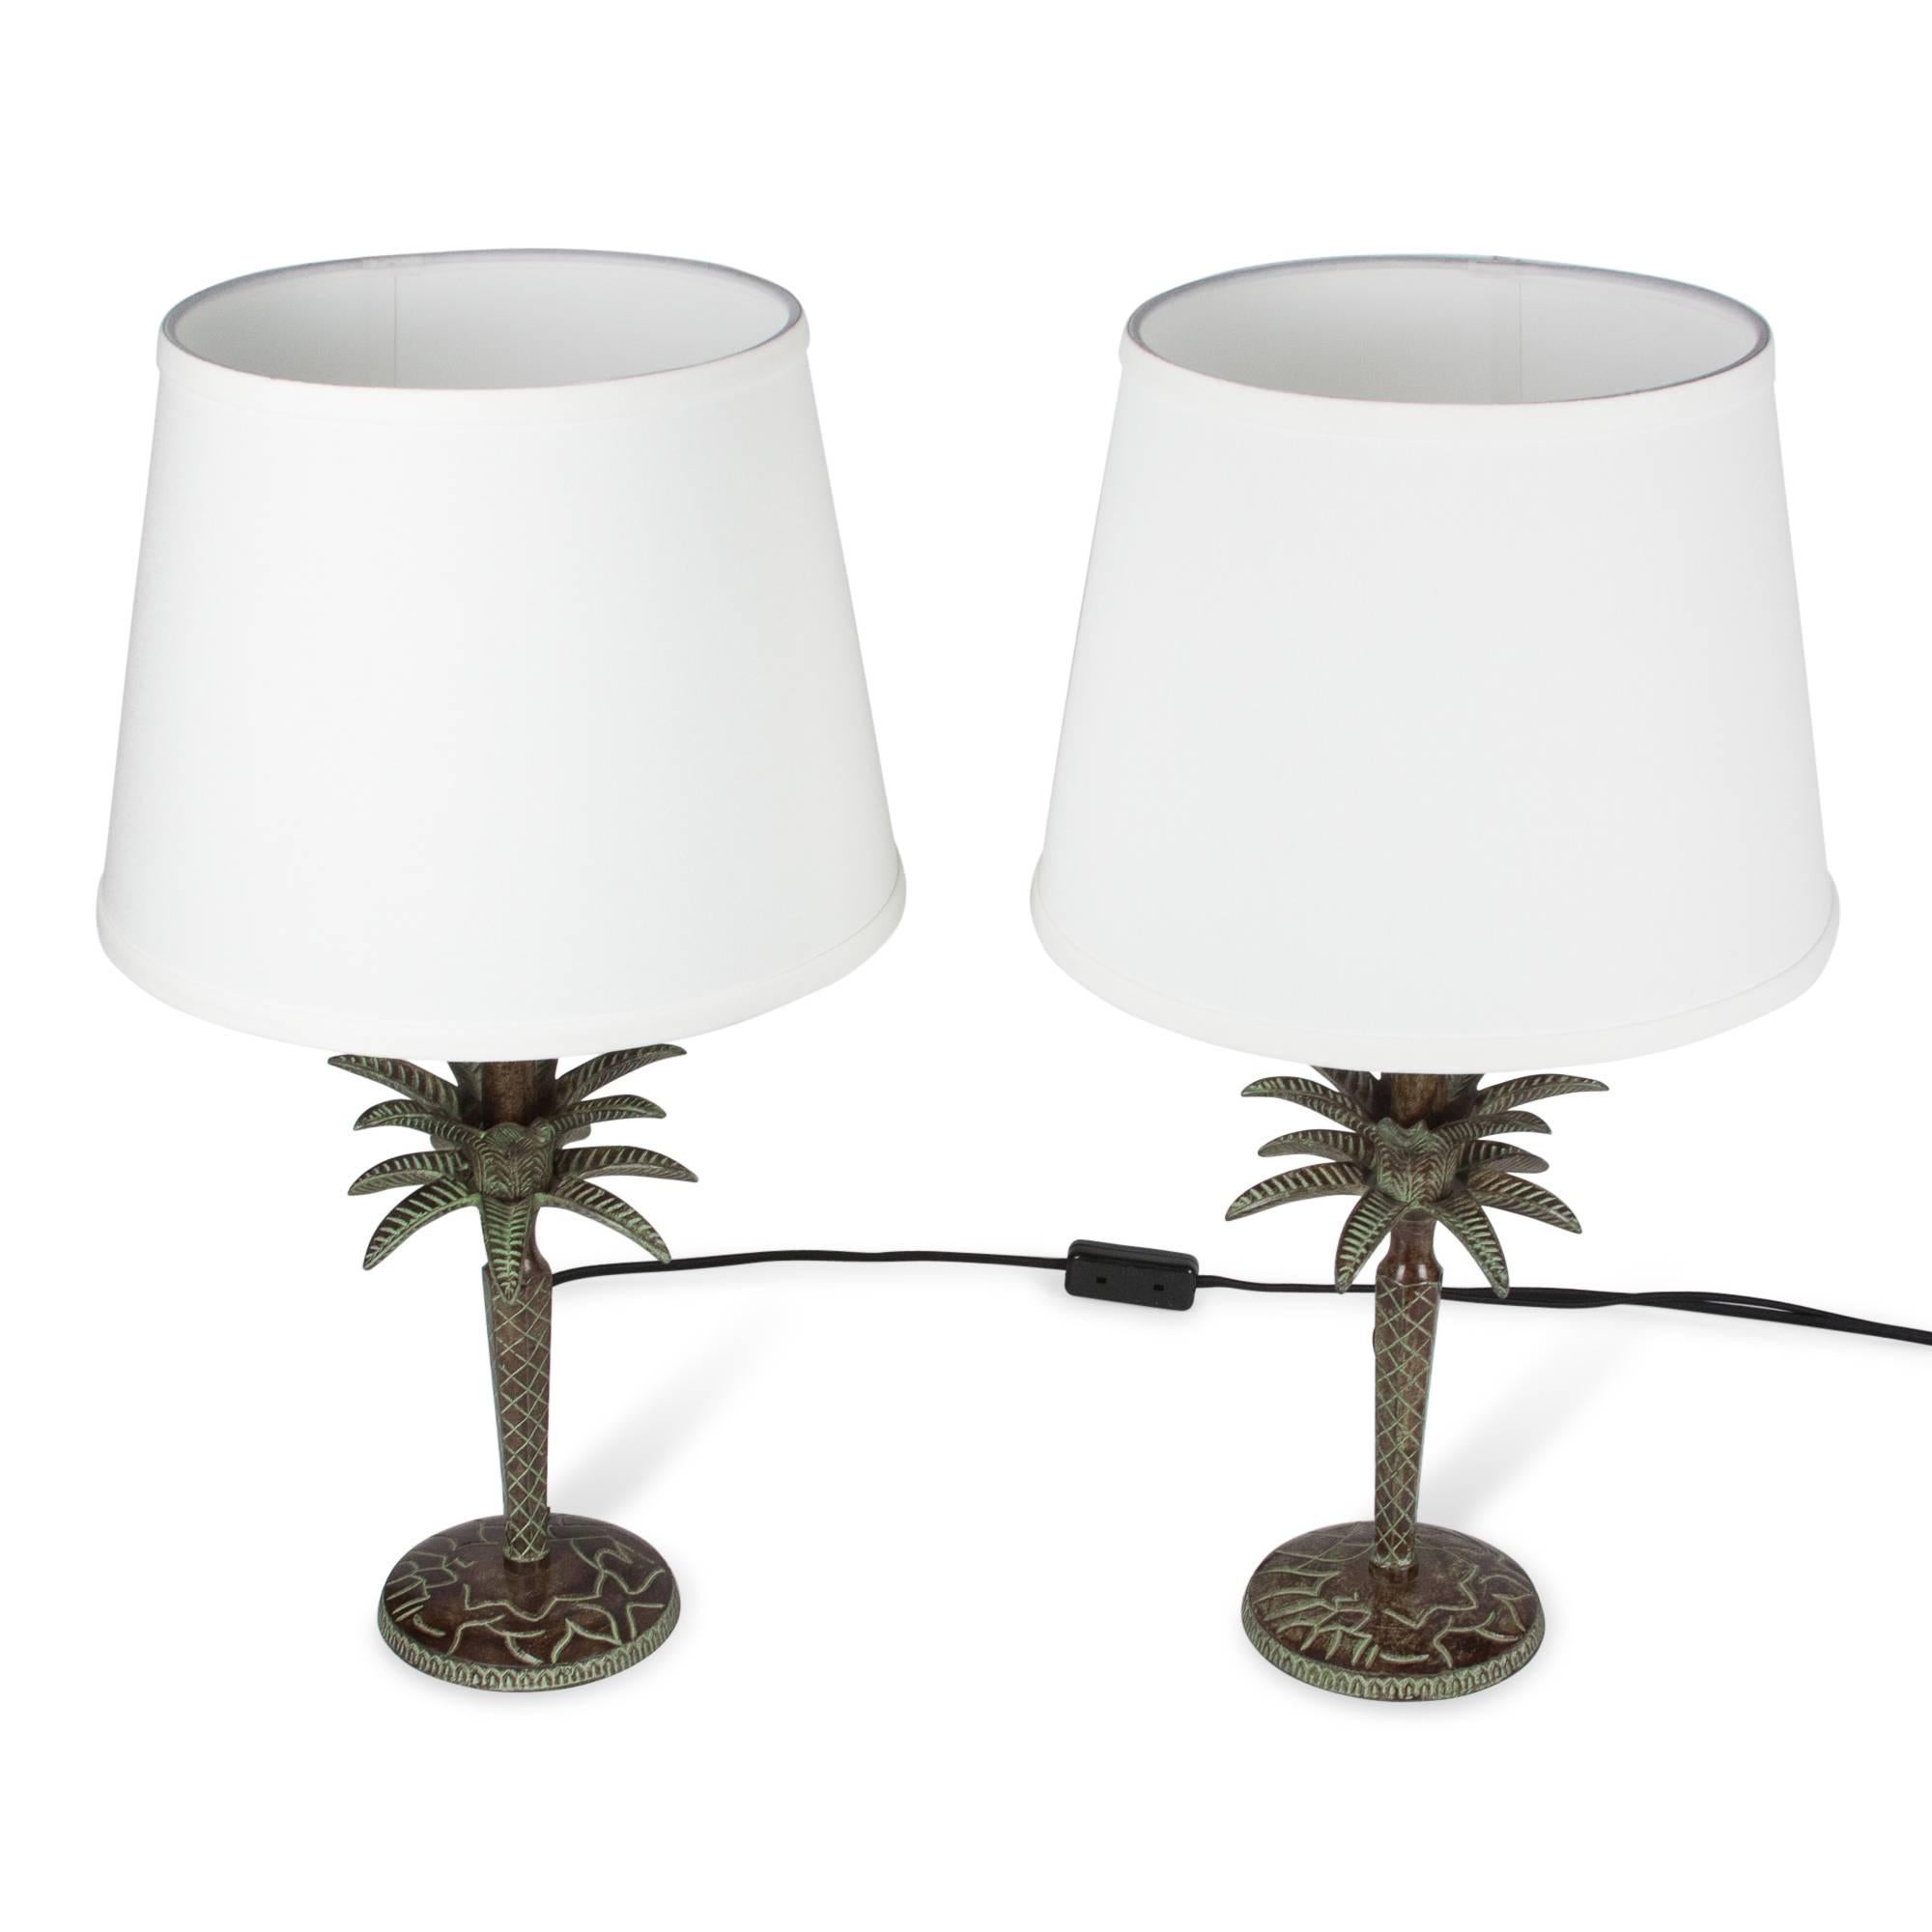 Pair of patinated bronze table lamps, plant form with leaves and having engraved decoration, France, 1990s. Overall height 22 in, diameter of base 5 1/4 in. Shade measures top diameter 9 in, bottom diameter 12 in, height 10 in.

Price for the pair.